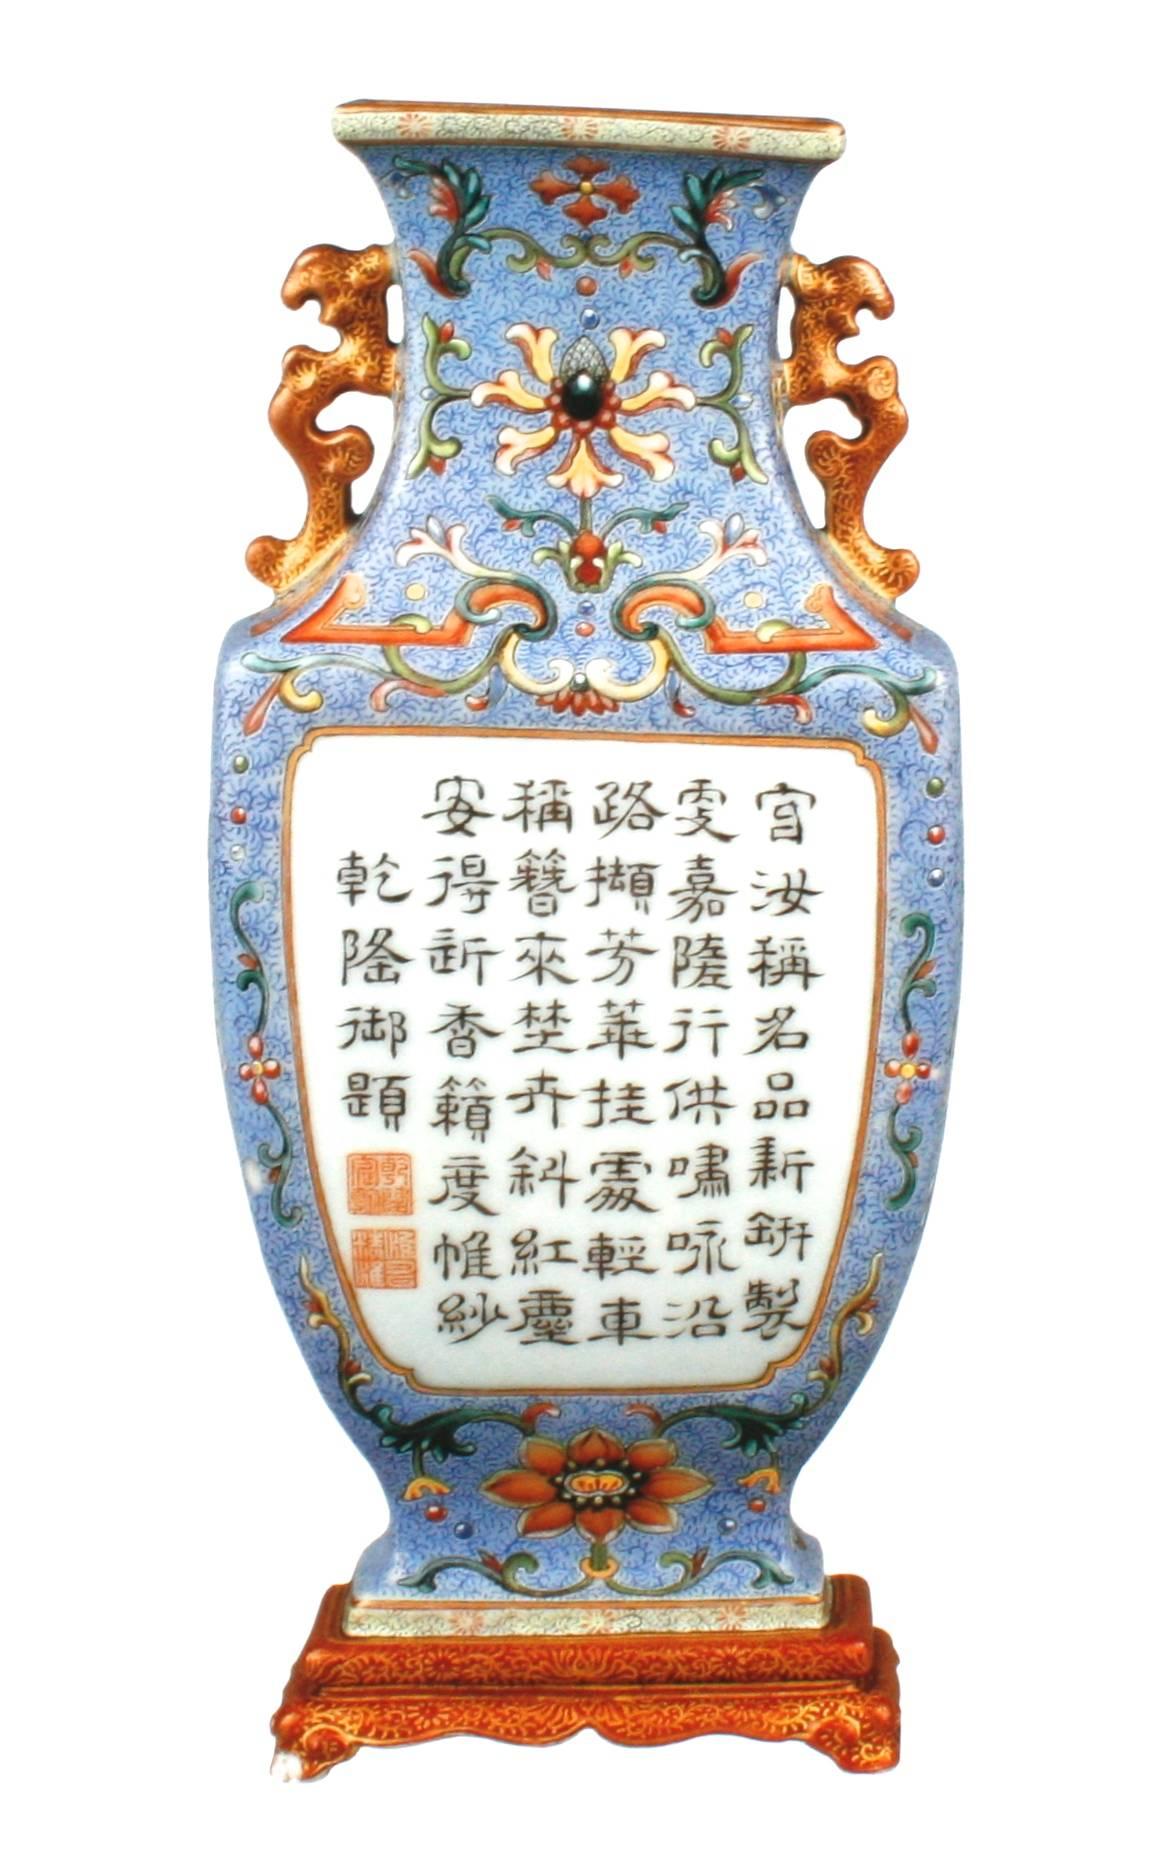 American For The Imperial Court: Qing Porcelain, First Edition